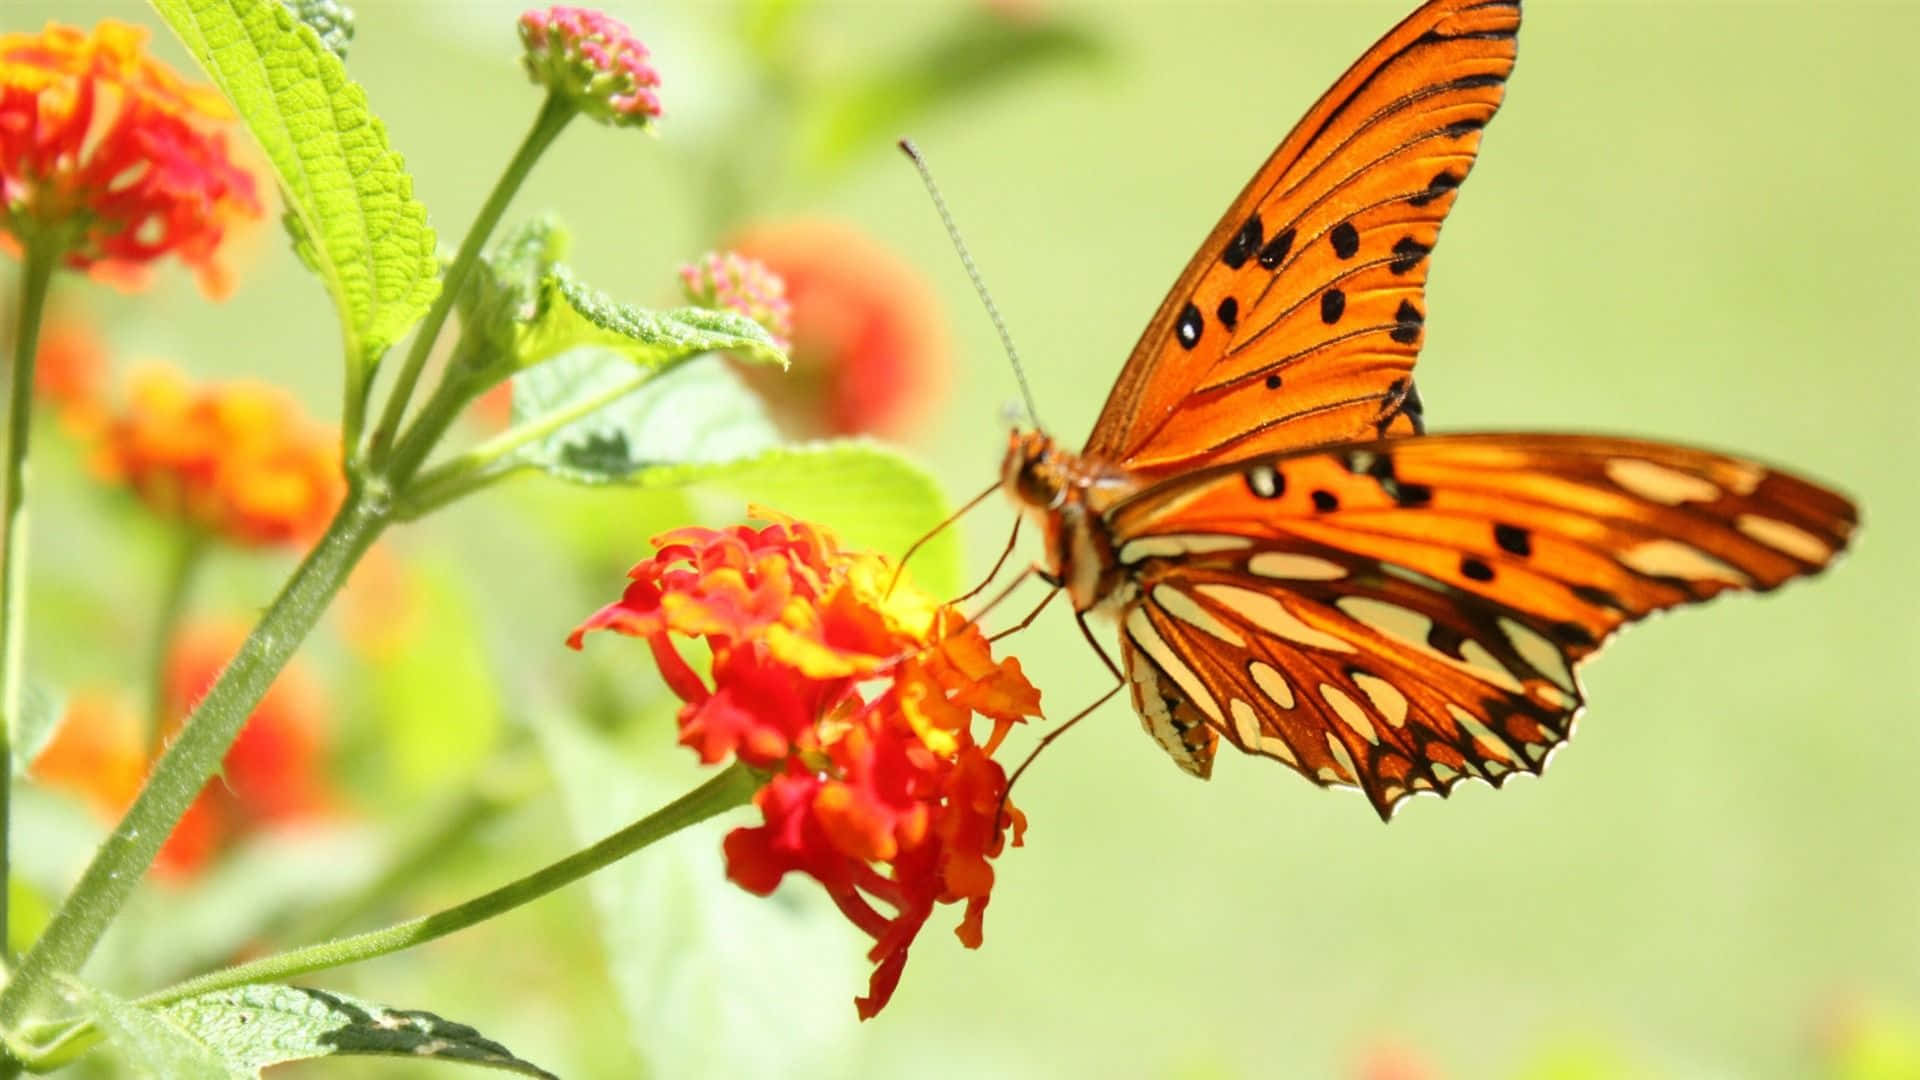 Be mesmerized by the vibrant colors of this Butterfly Photography Wallpaper